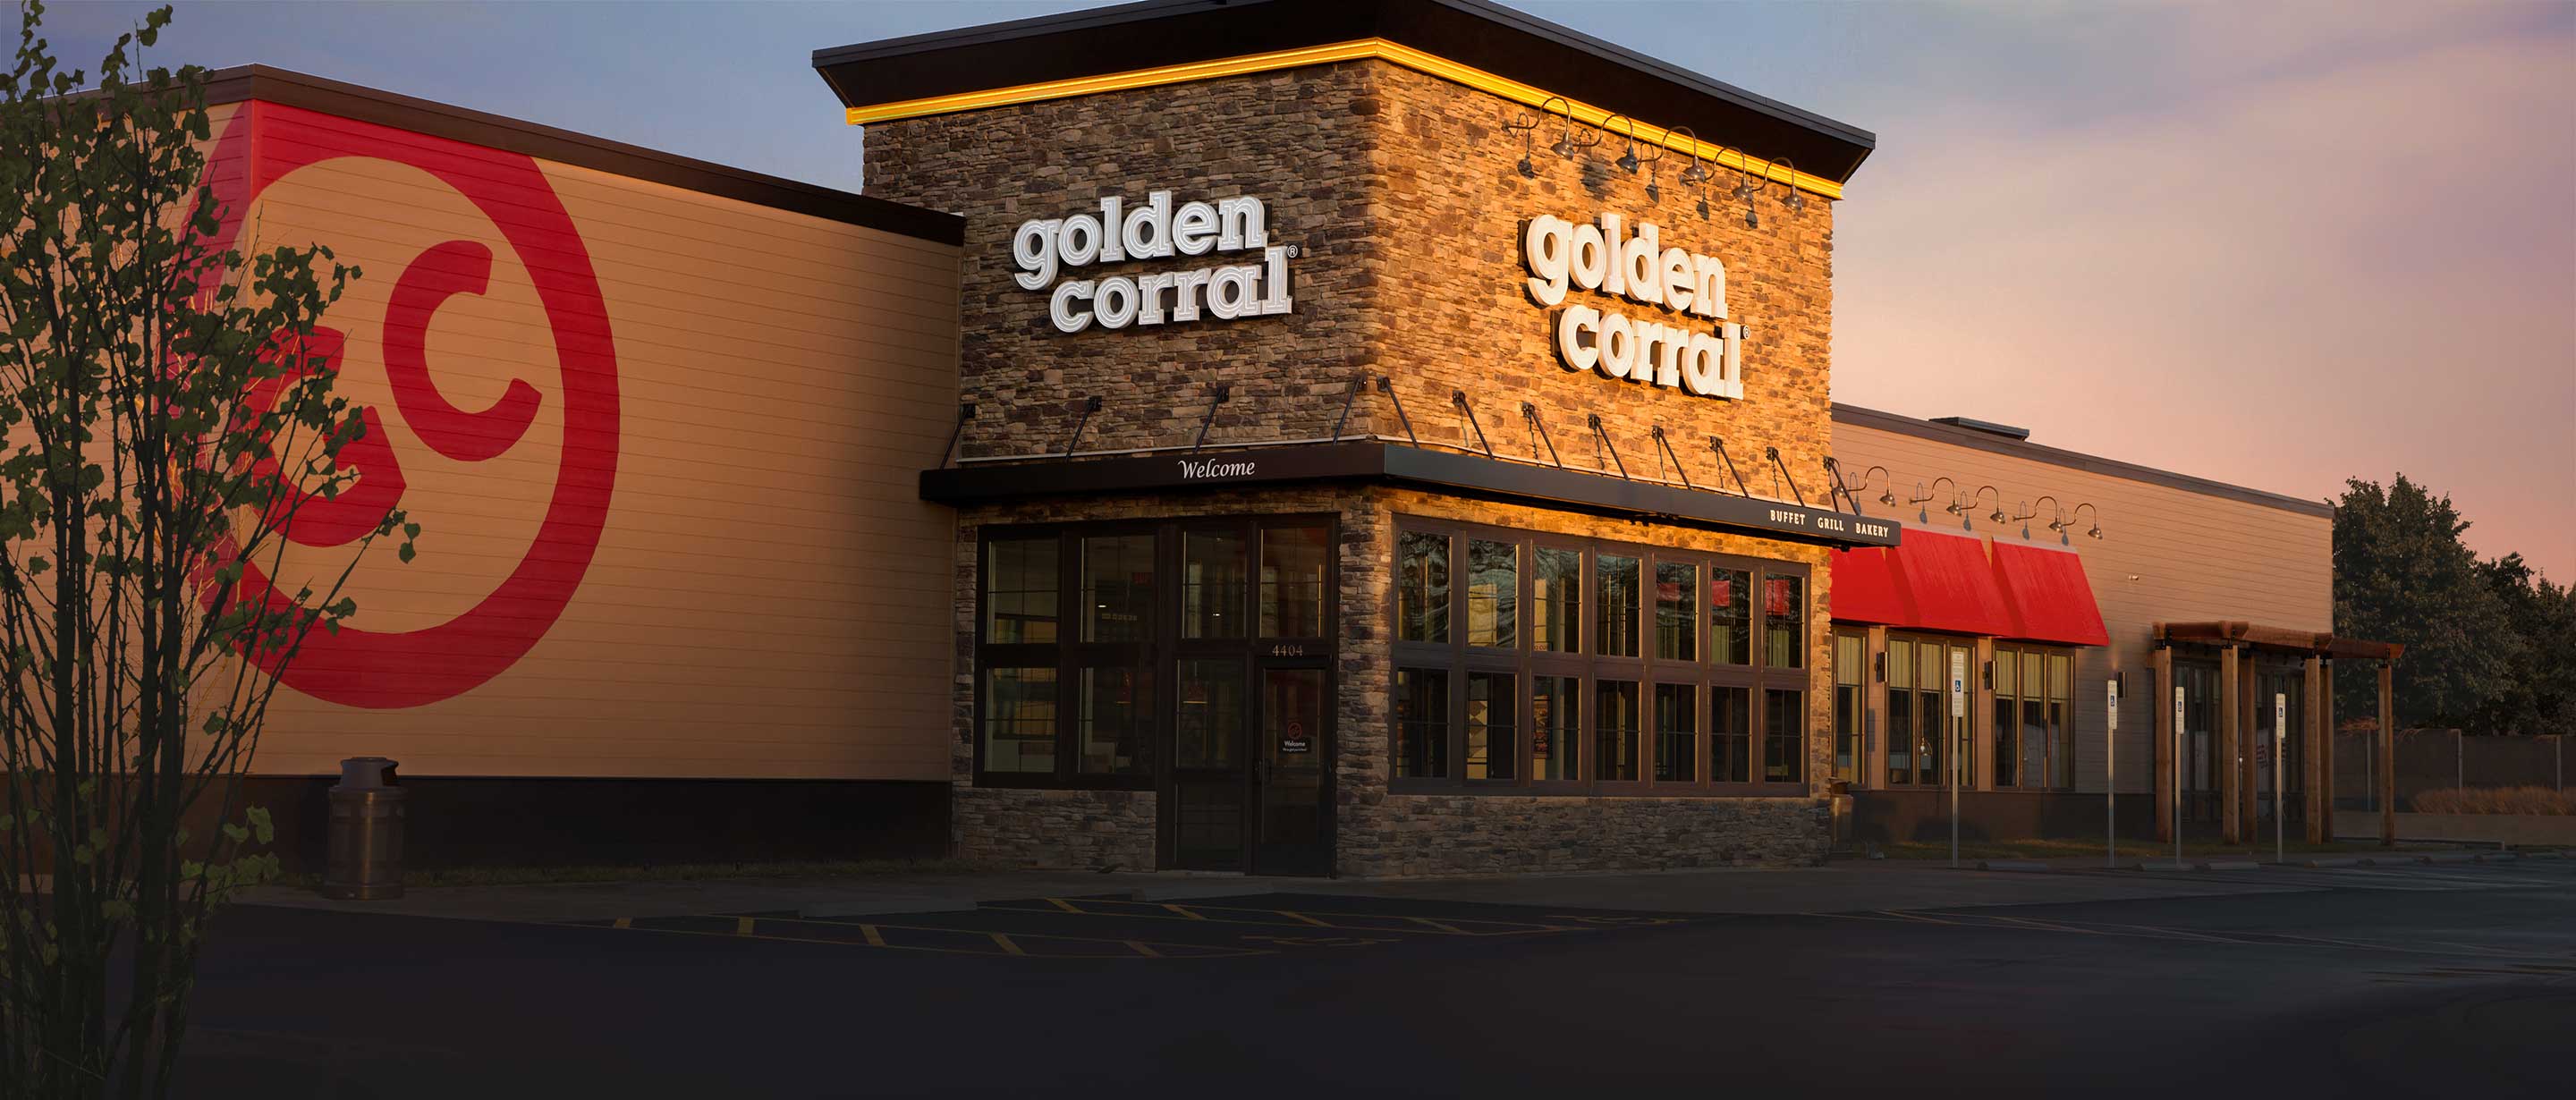 frequently-asked-questions-golden-corral-buffet-restaurants